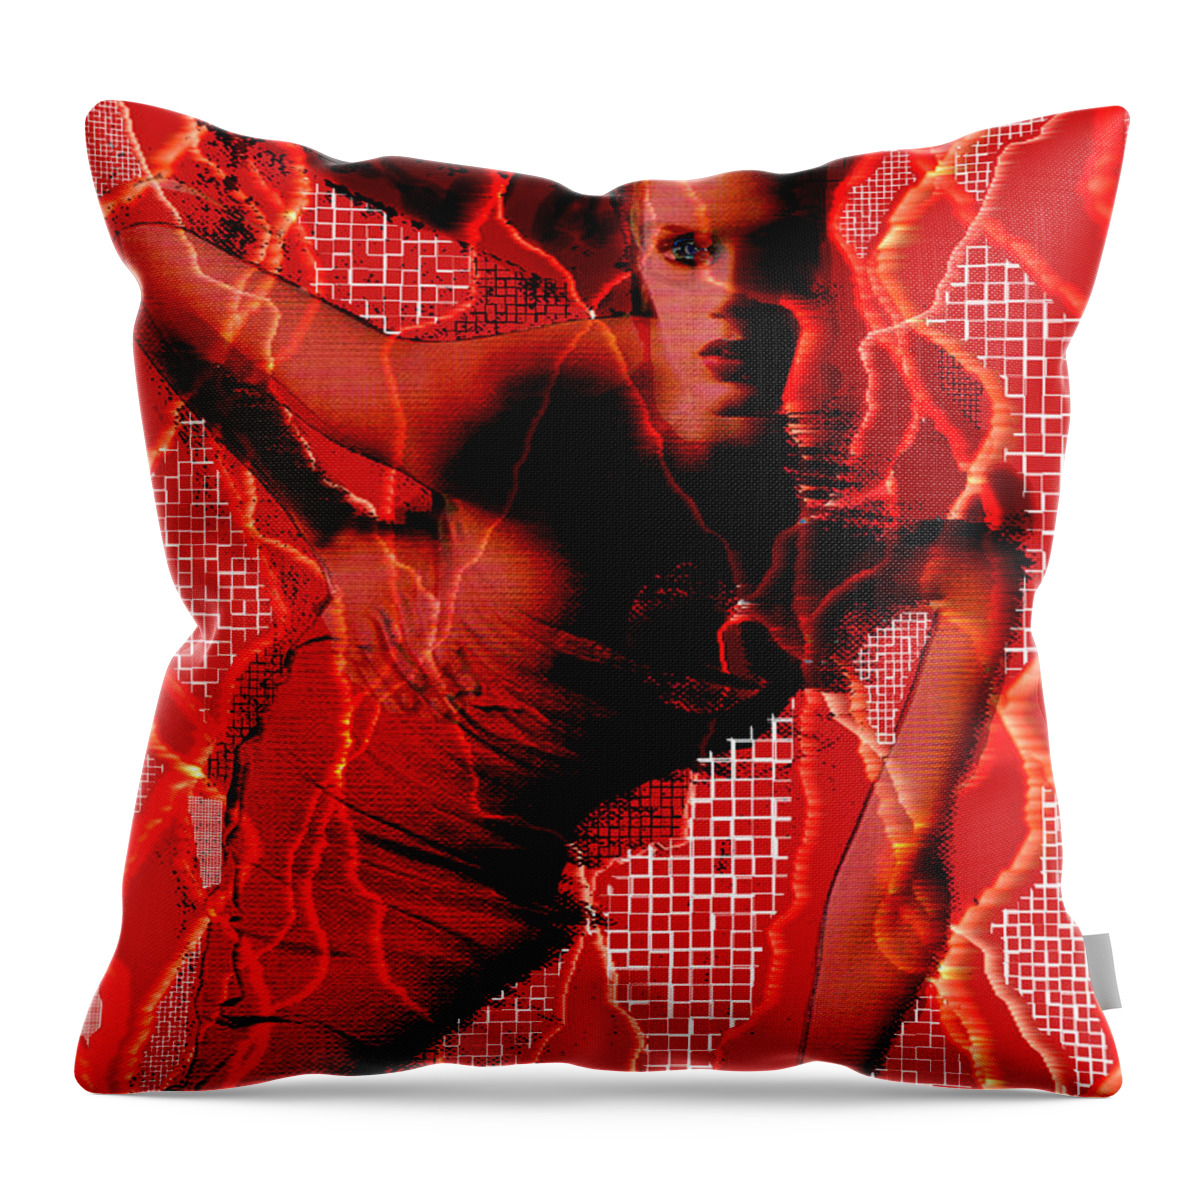 Ensnared Throw Pillow featuring the digital art Ensnared by Seth Weaver